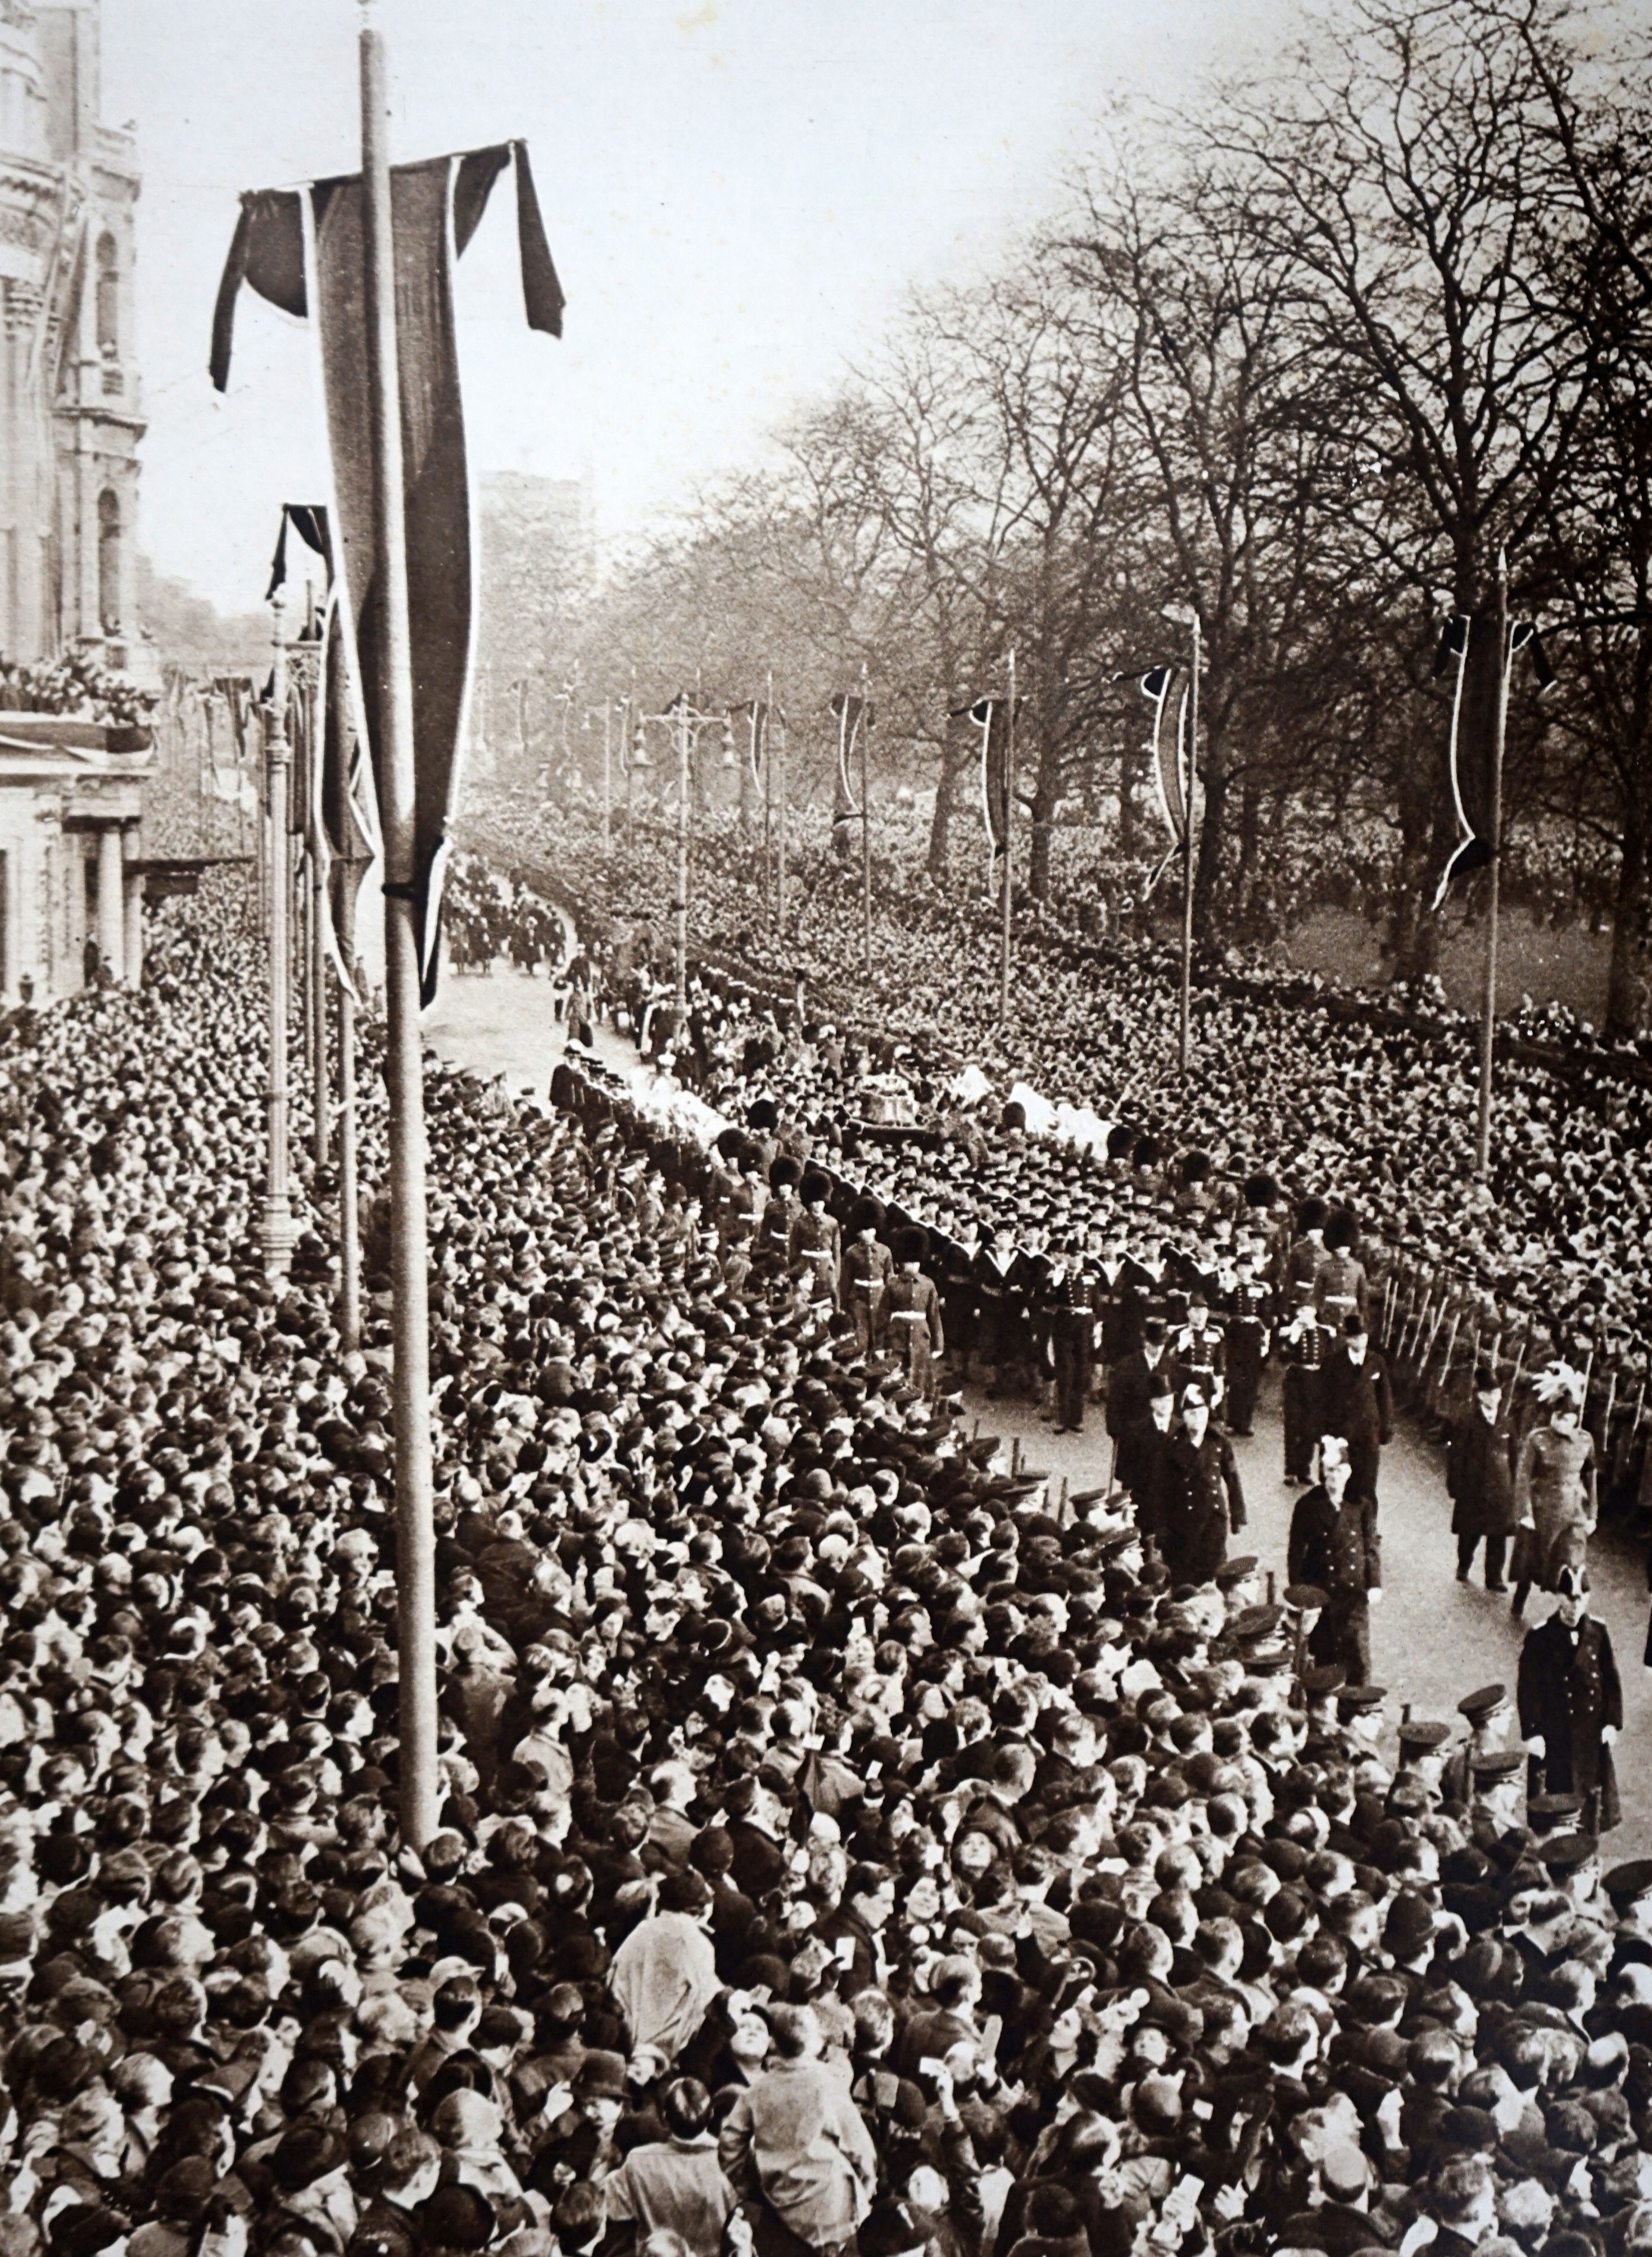 <p>Thousands of people lined the streets for the state funeral procession of King George V, who was buried on Jan. 28, 1936, following his death eight days earlier. He's Queen Elizabeth II's grandfather and was a grandson of Queen Victoria and Prince Albert.</p>